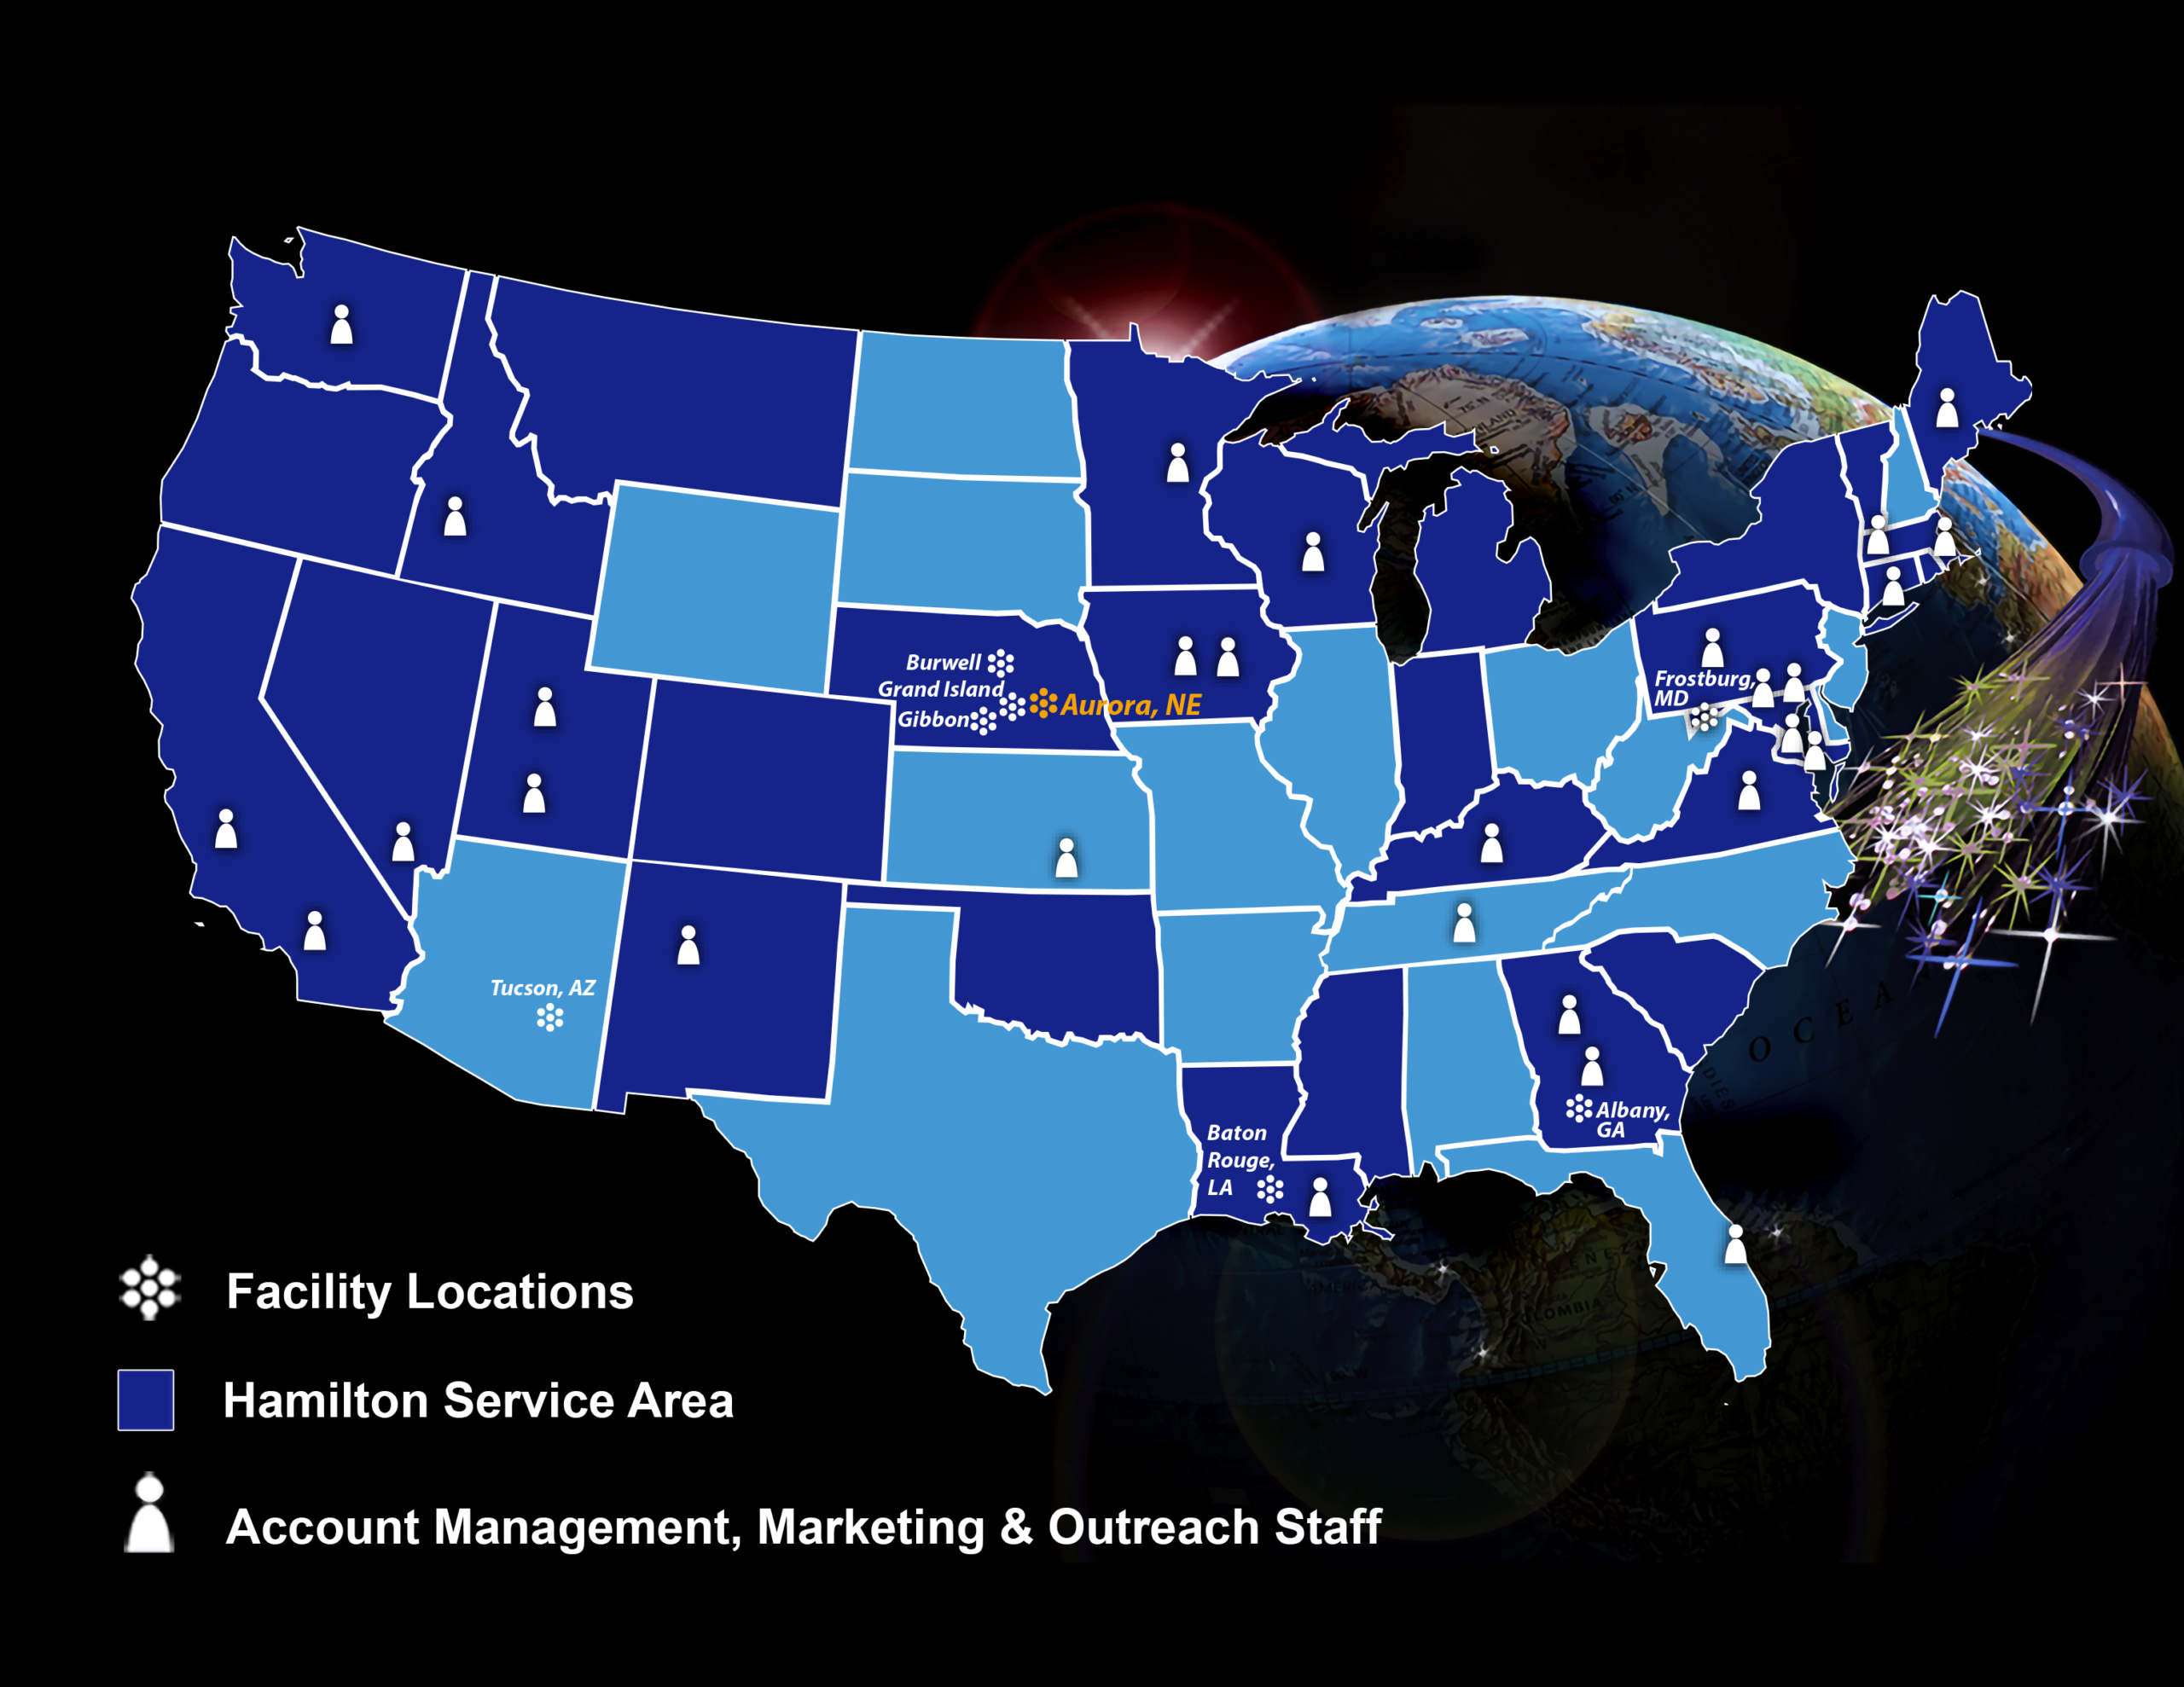 United States corporate map with facility locations, Hamilton service area, and staff locations.